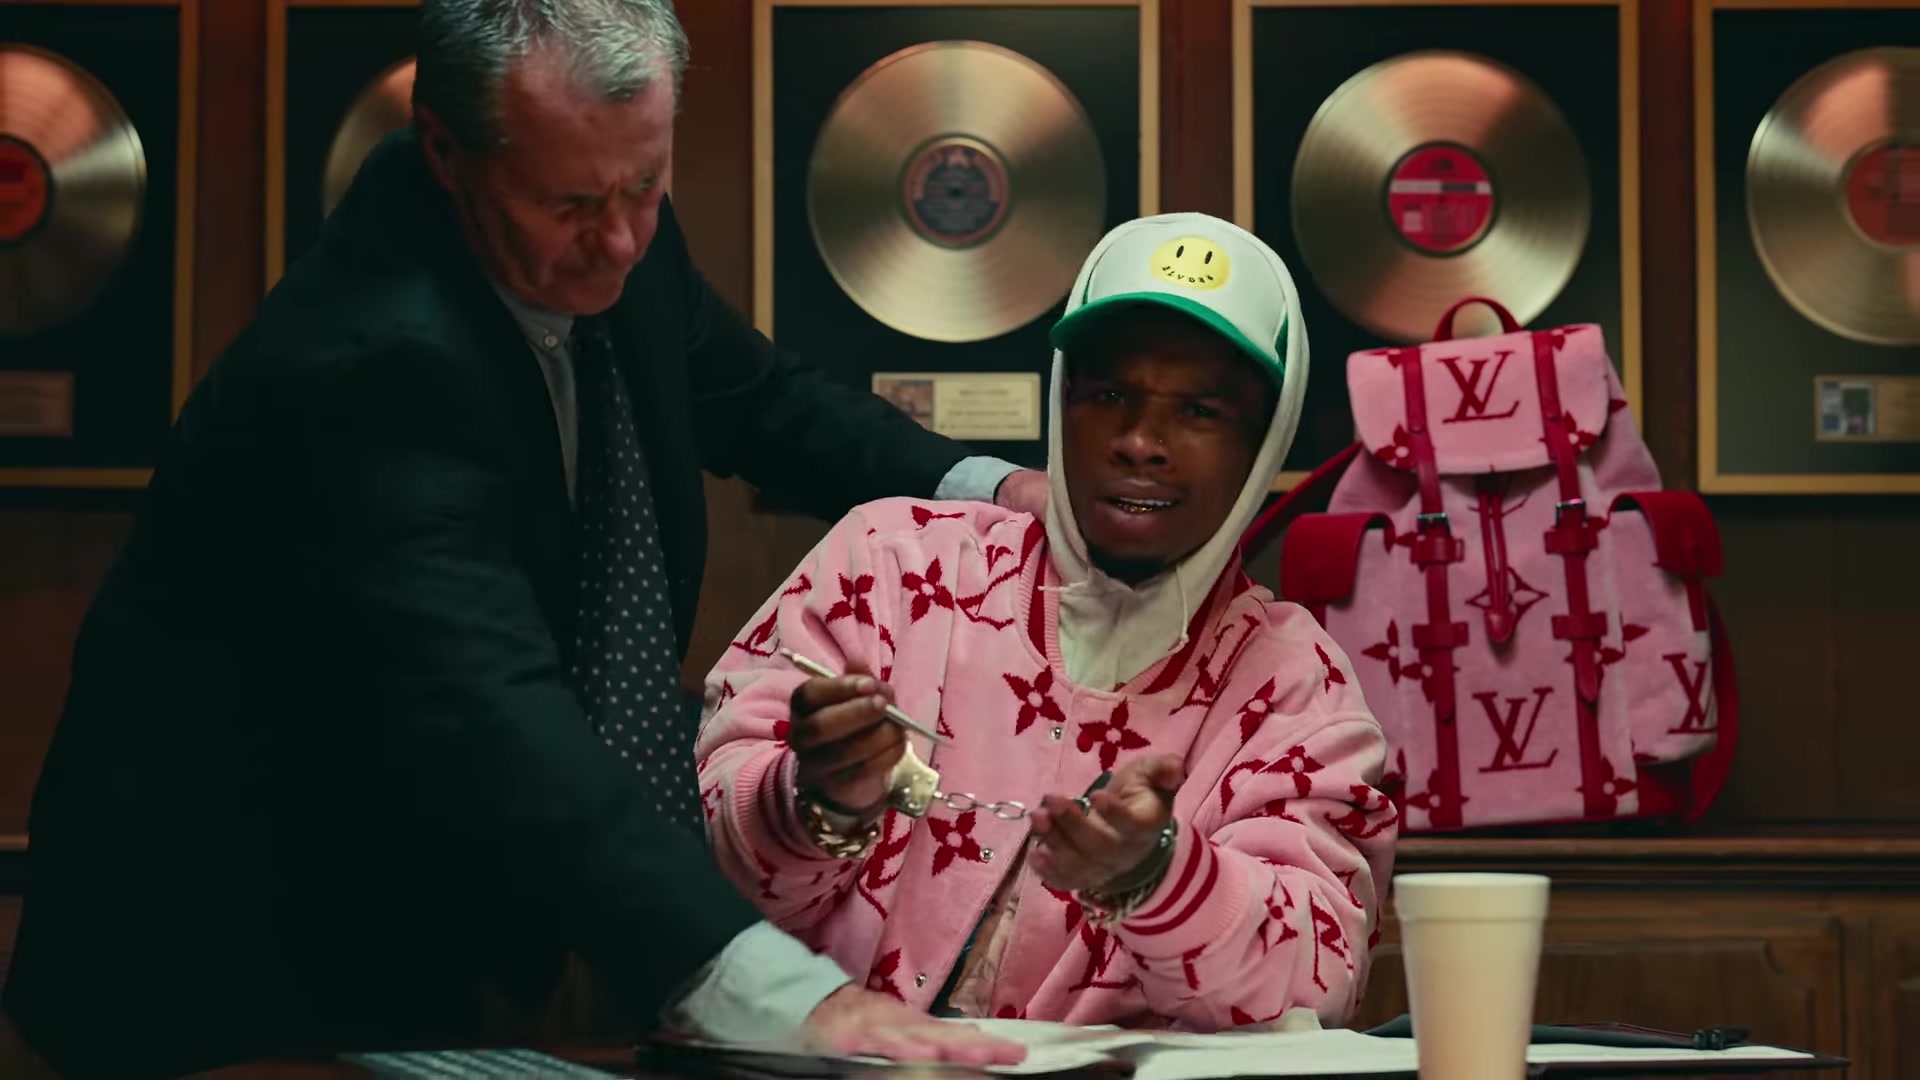 Louis Vuitton Pink Jacket And Backpack Of Tory Lanez In Most High (2020)